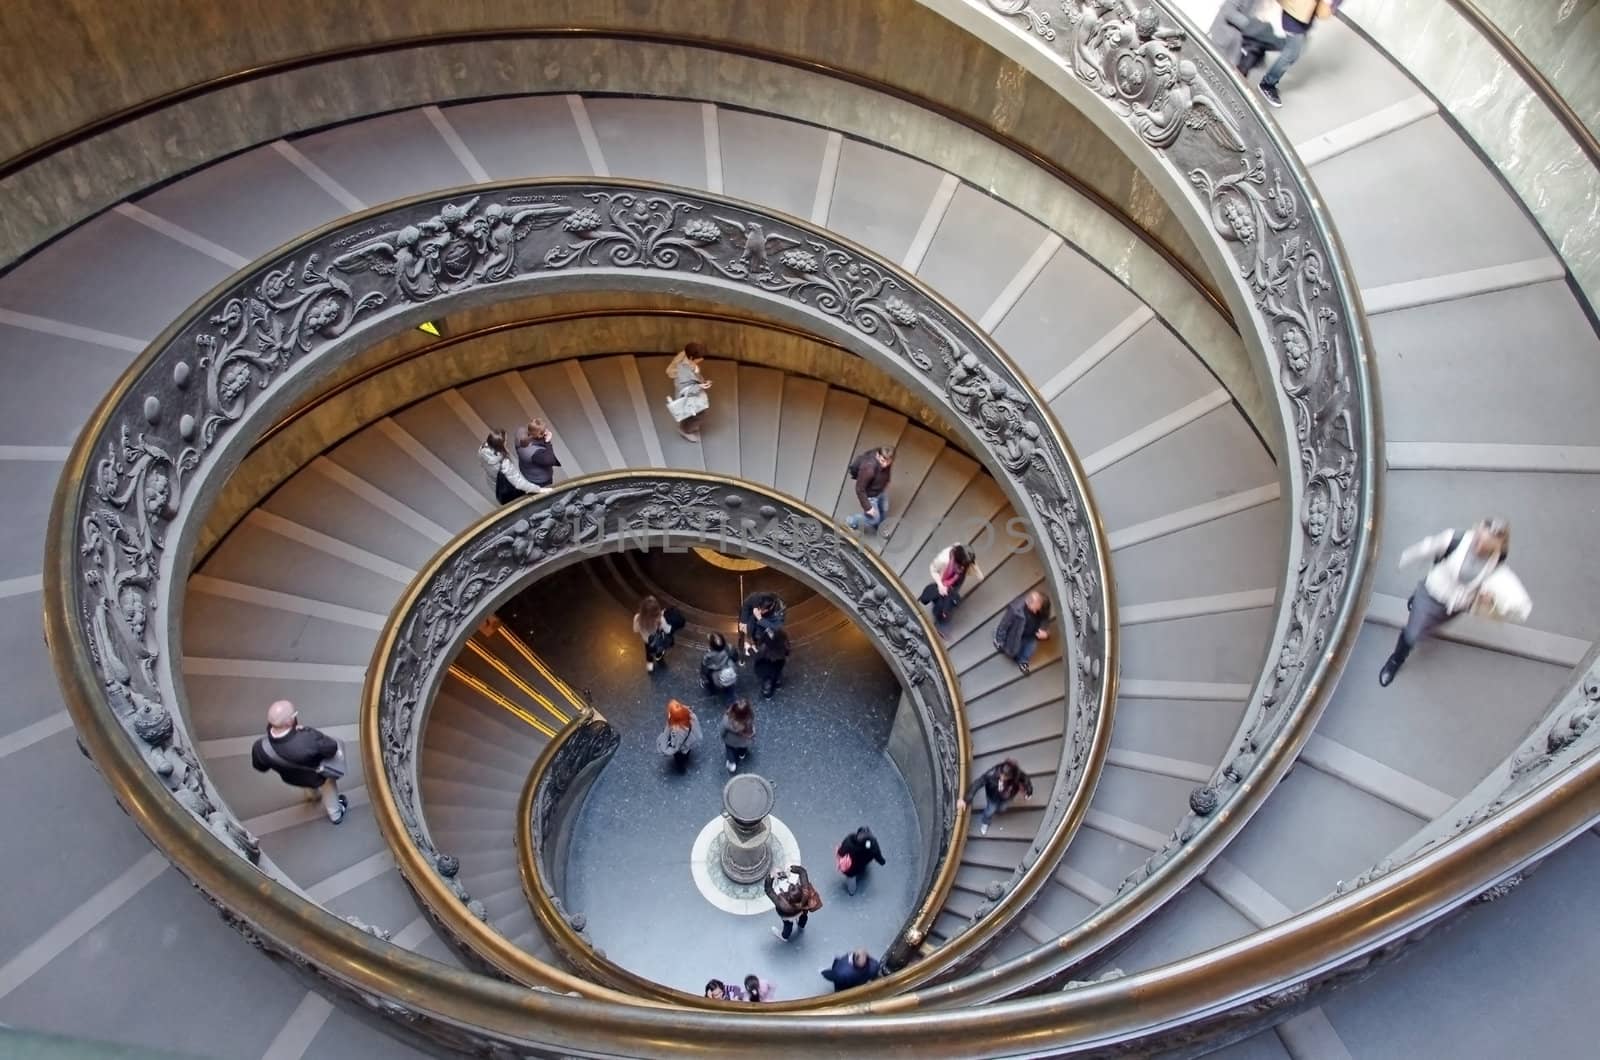 ROME, ITALY - MARCH 08: Interior view of Vatican Museum, spiral stairs (double helix) on March 08, 2011 in Rome, Italy